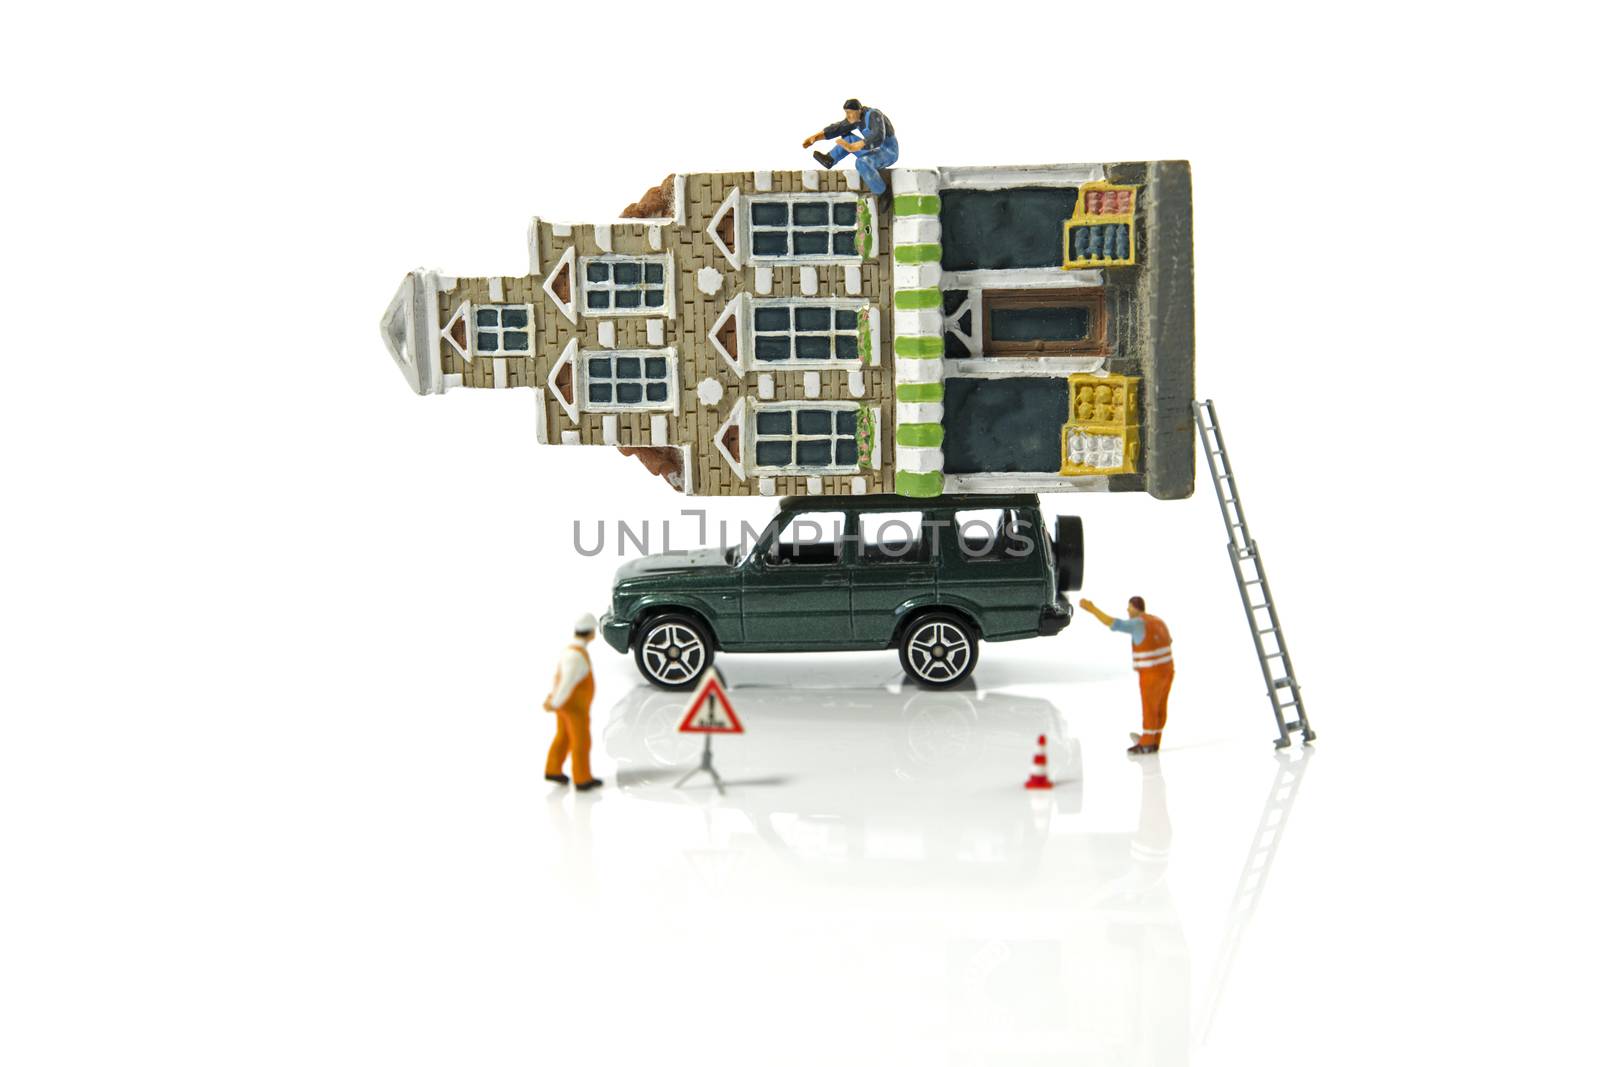 little figures moving the house on a car ready for transport